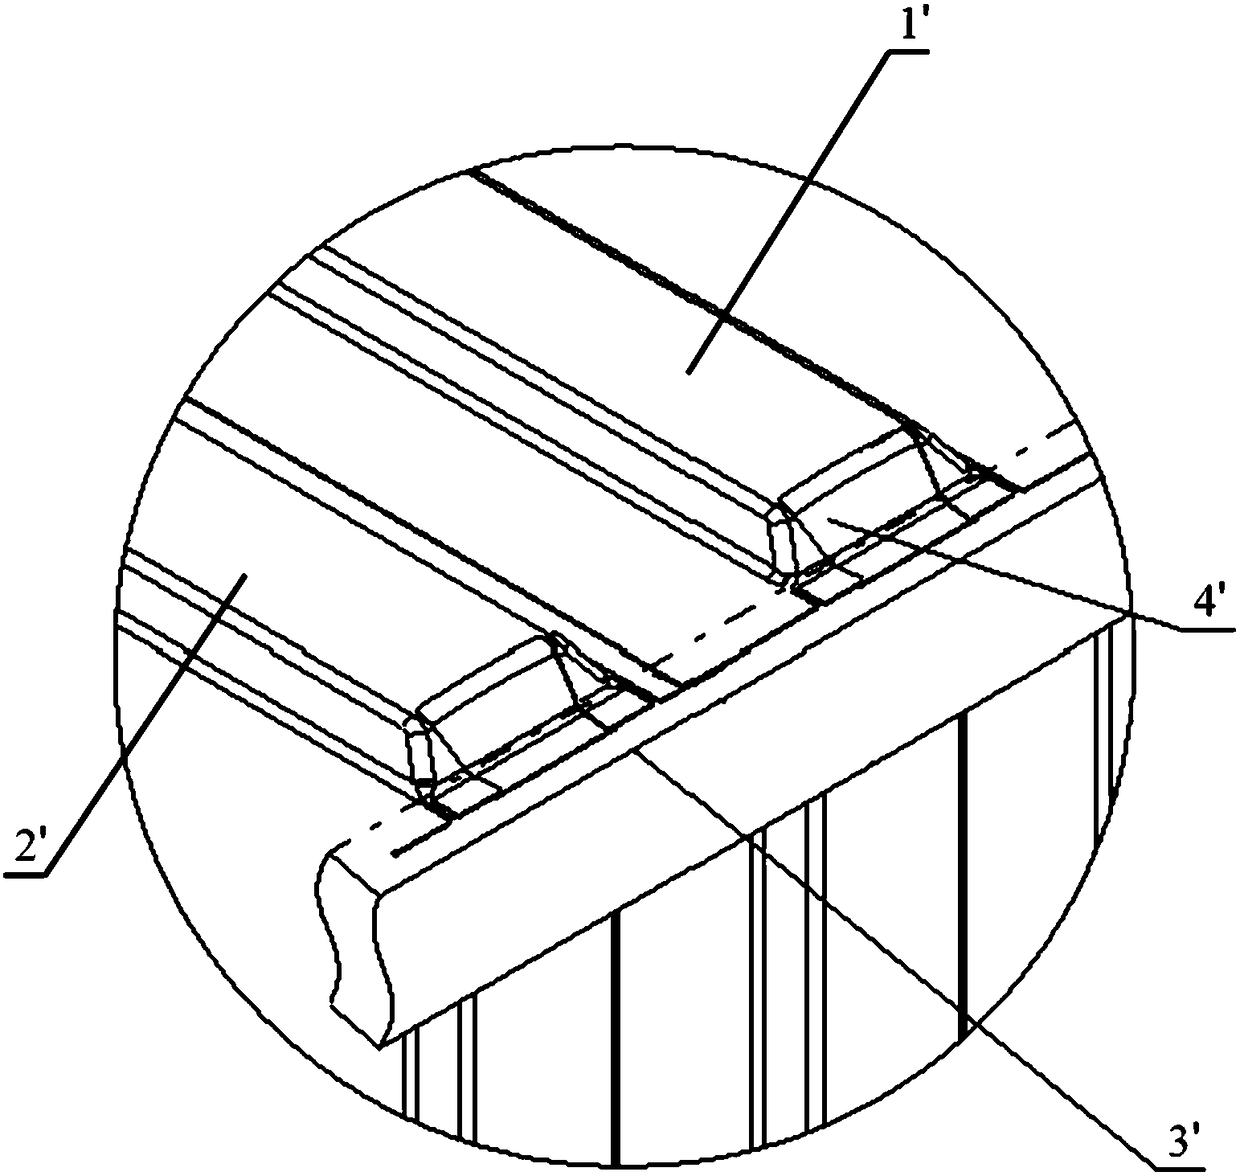 A roof assembly of a box-type cargo compartment